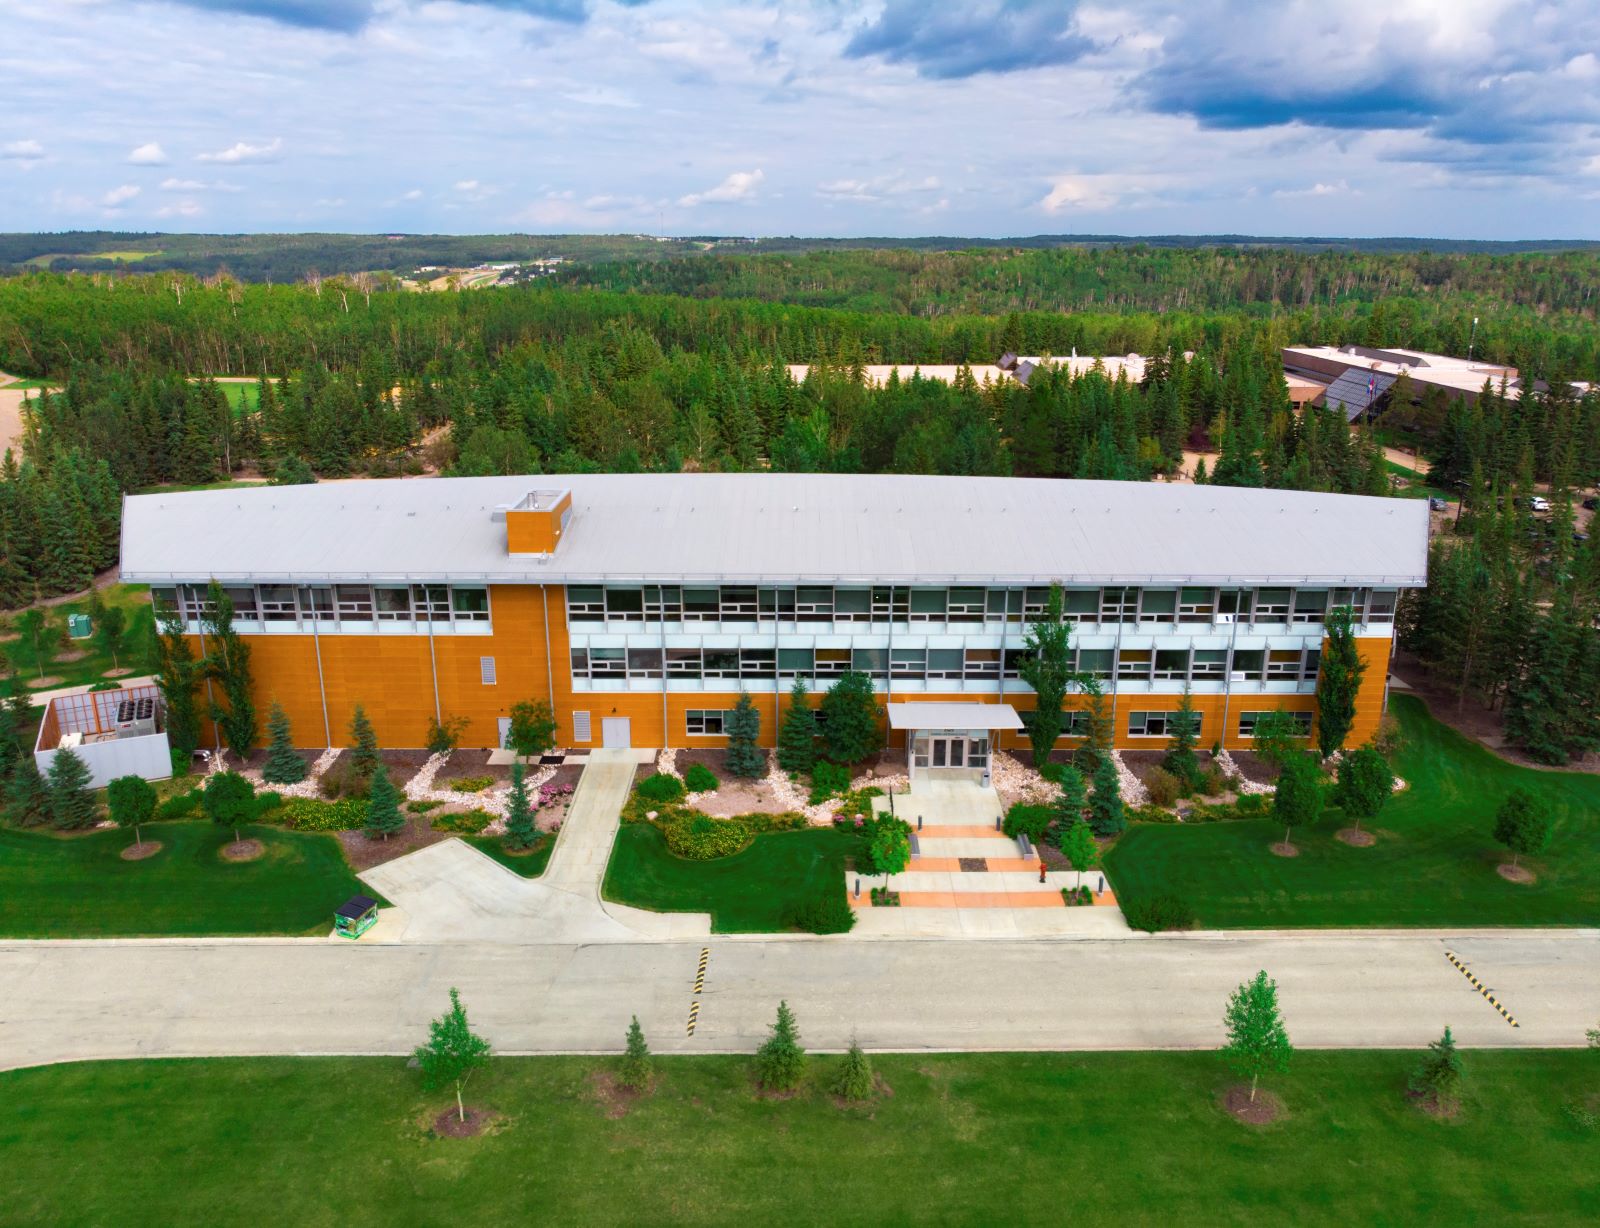 An aerial view of the Academic and Research Center at Athabasca University in Athabasca, Alberta.